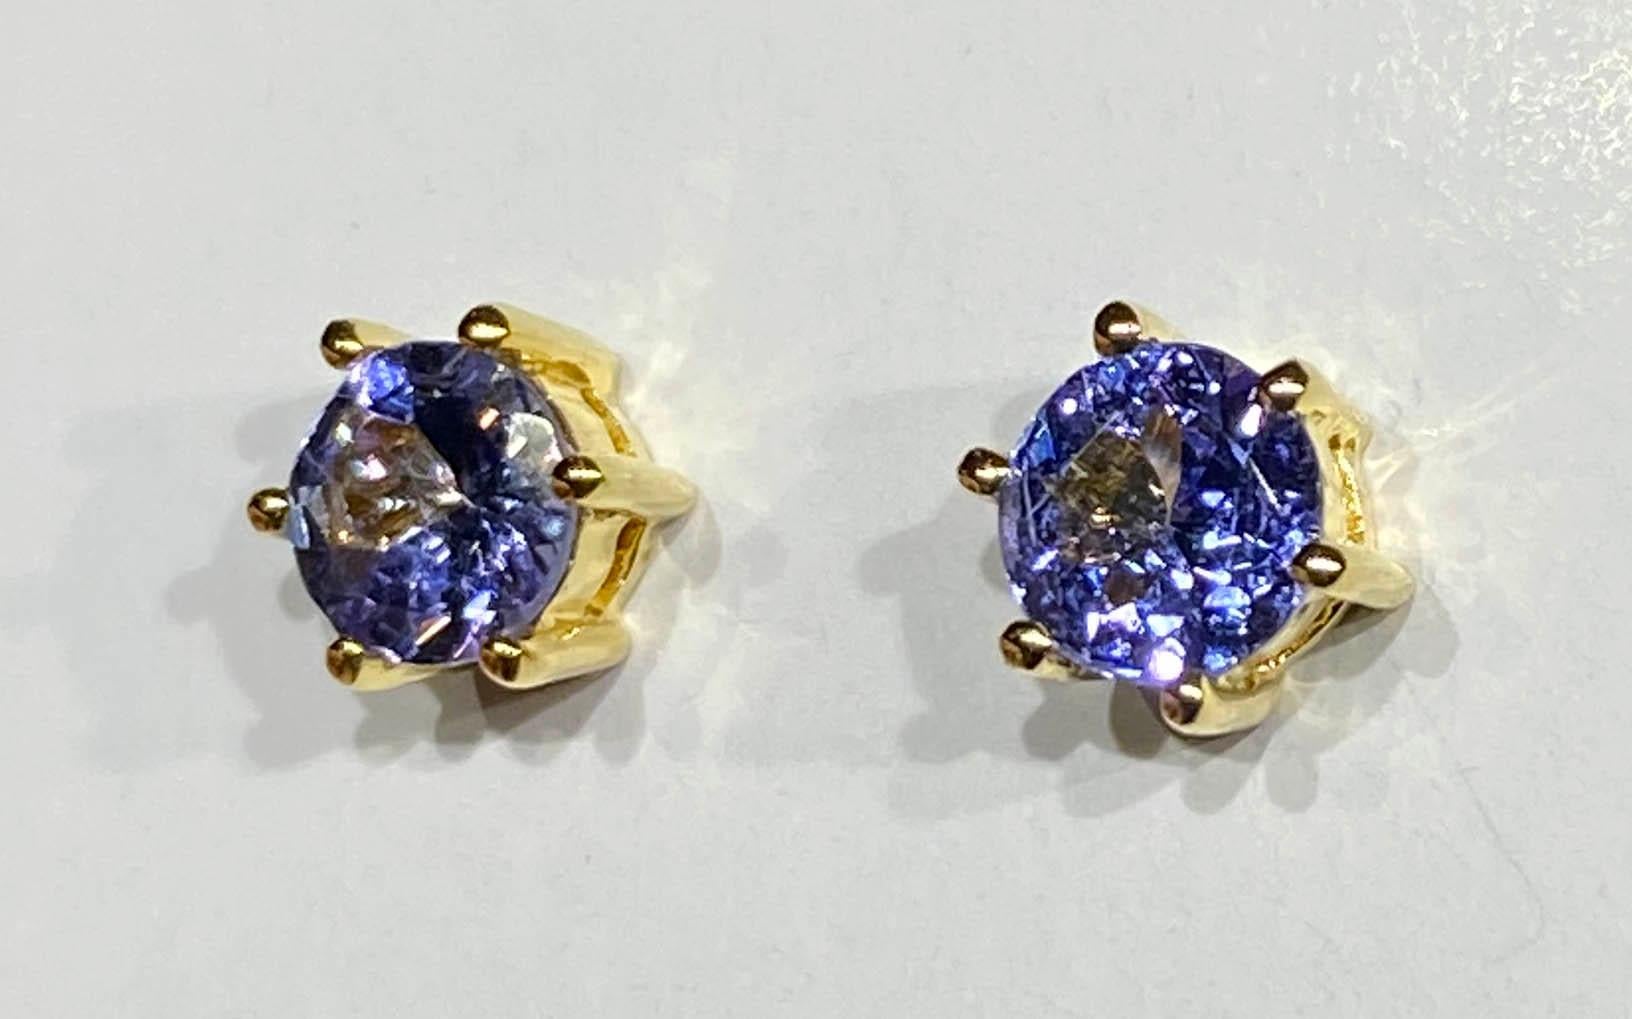 Kary Adam Designed, 14kt Yellow Gold Stud Earrings set with 4 Millimeter Tanzanite Rounds. Backing is a secure plastic back holdfast

Originally from San Diego, California, Kary Adam lived in the “Gem Capital of the World” - Bangkok, Thailand,